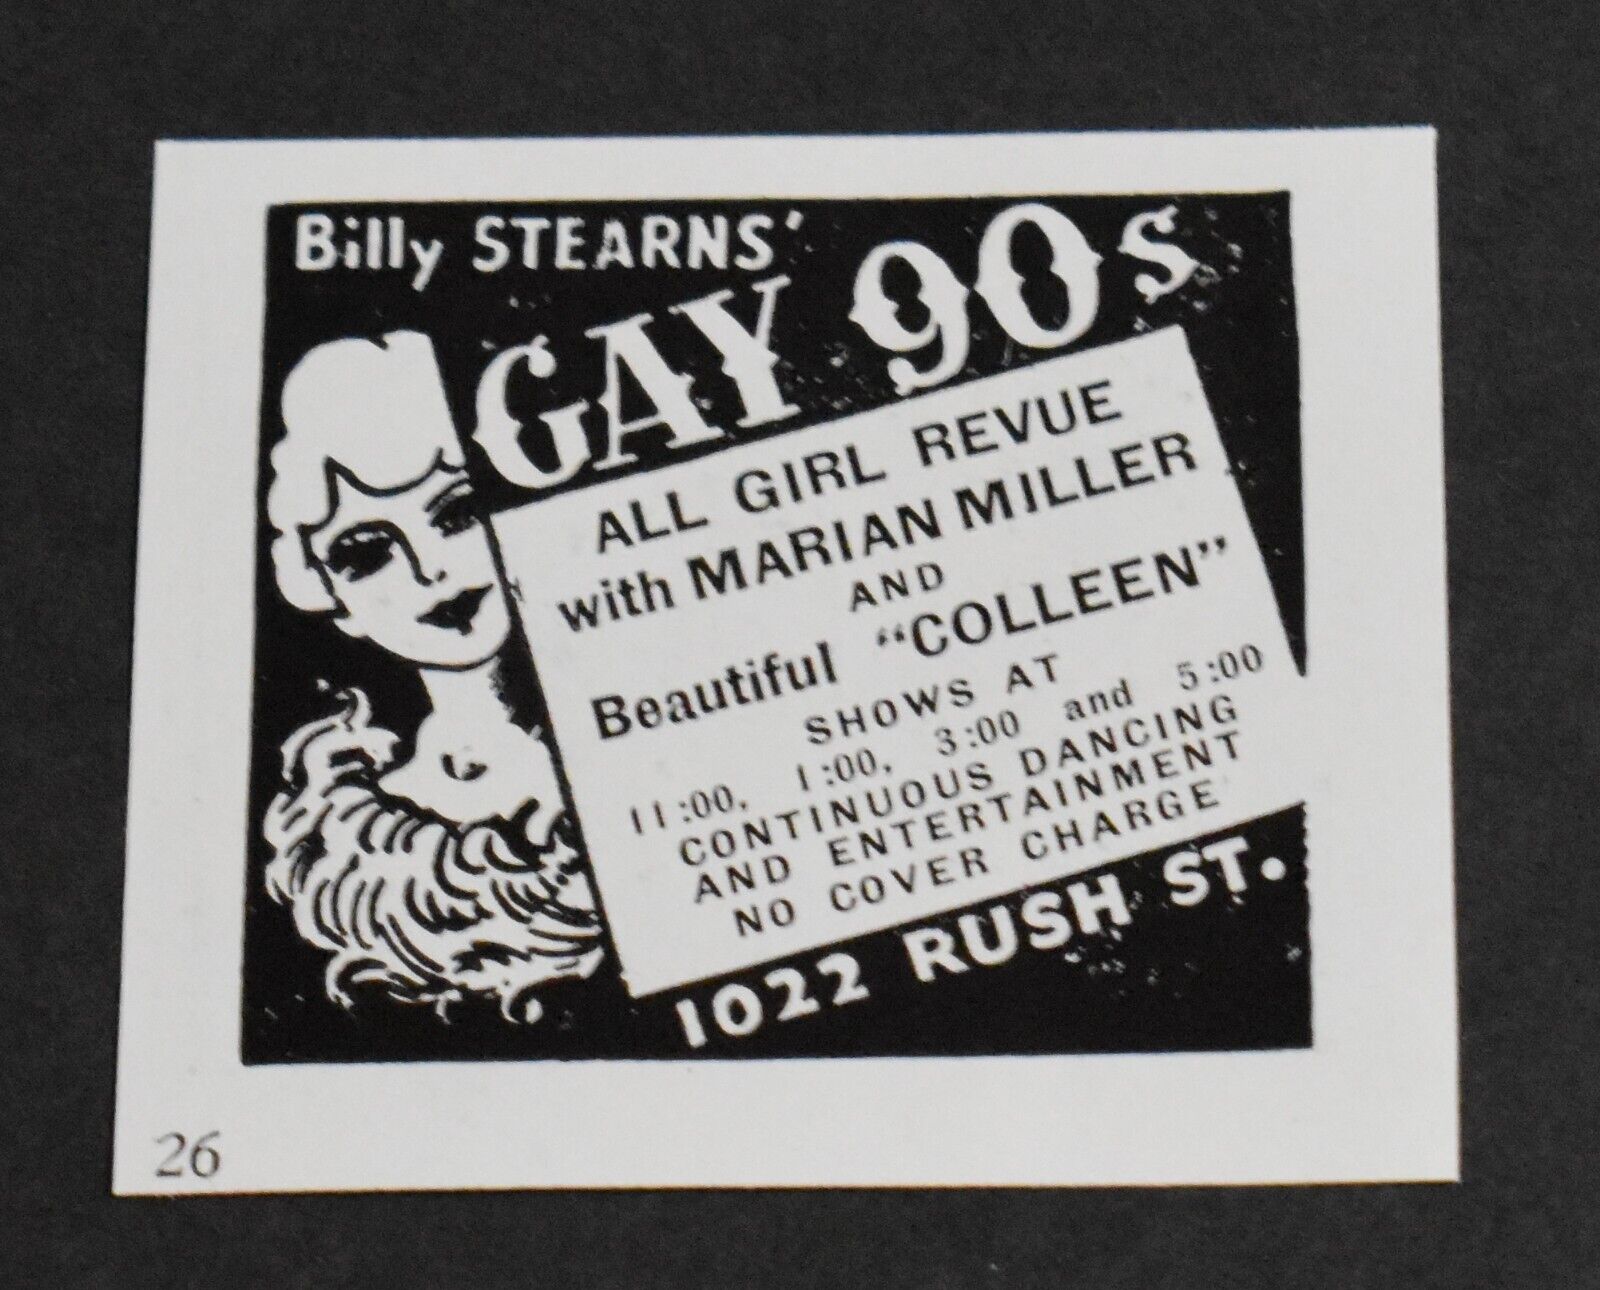 1937 Print Ad Chicago Billy Stearns\' Gay 90\'s Club Marian Miller Girl Revue art